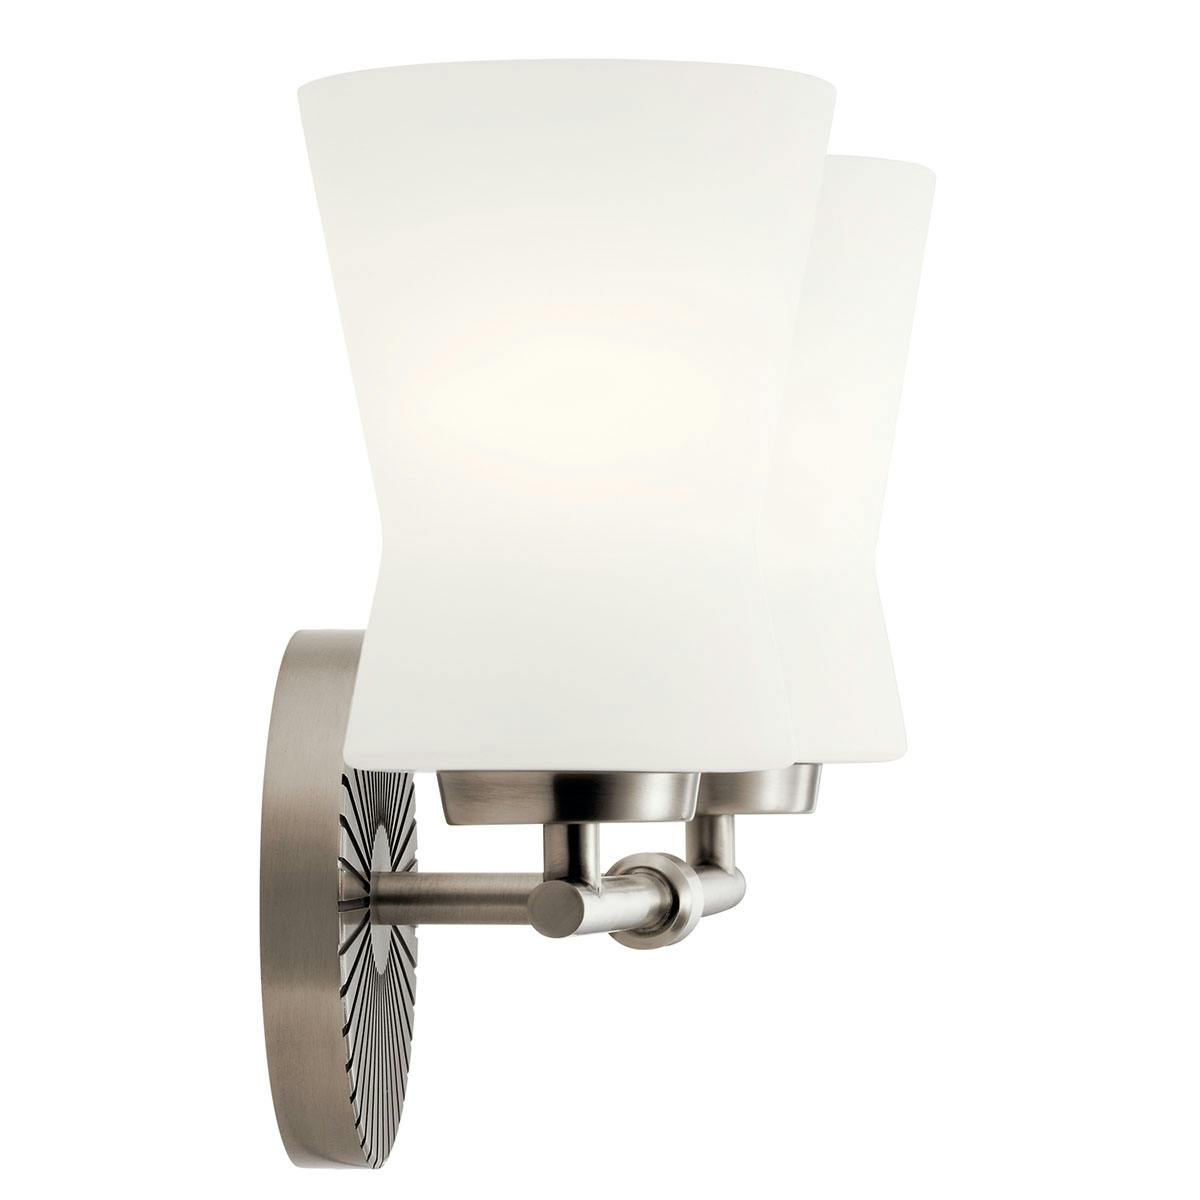 Profile view of the Brianne 2 Light Vanity Light Pewter on a white background